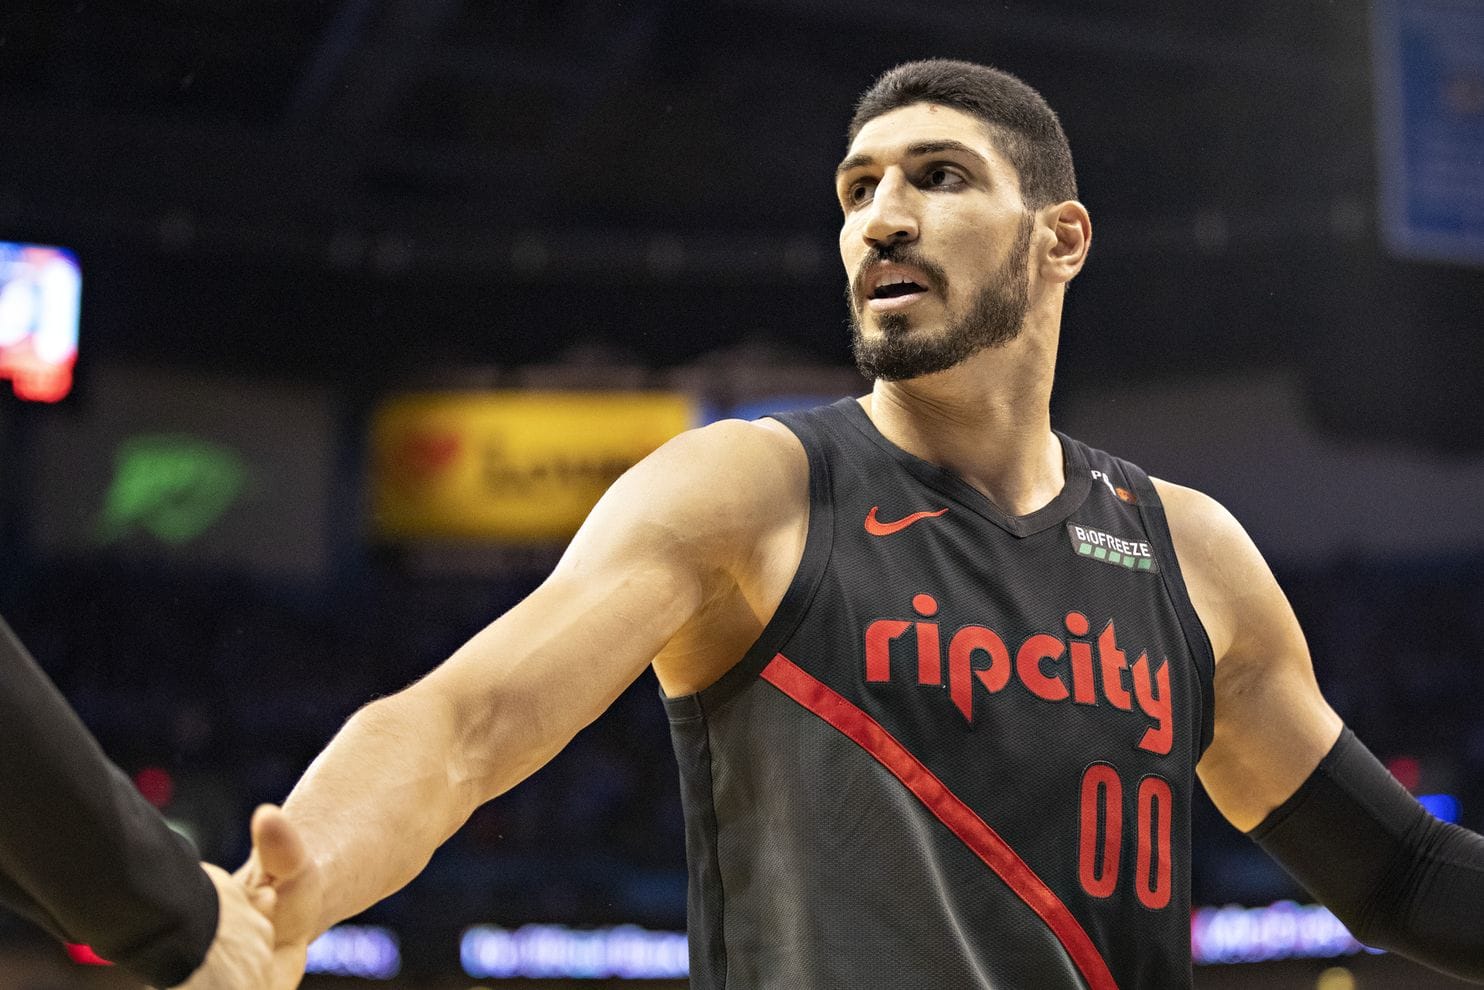 ‘This is hurtful’: Enes Kanter responds to abusive Nuggets fan who yelled ‘go back to Turkey, oh wait you can’t’ 1